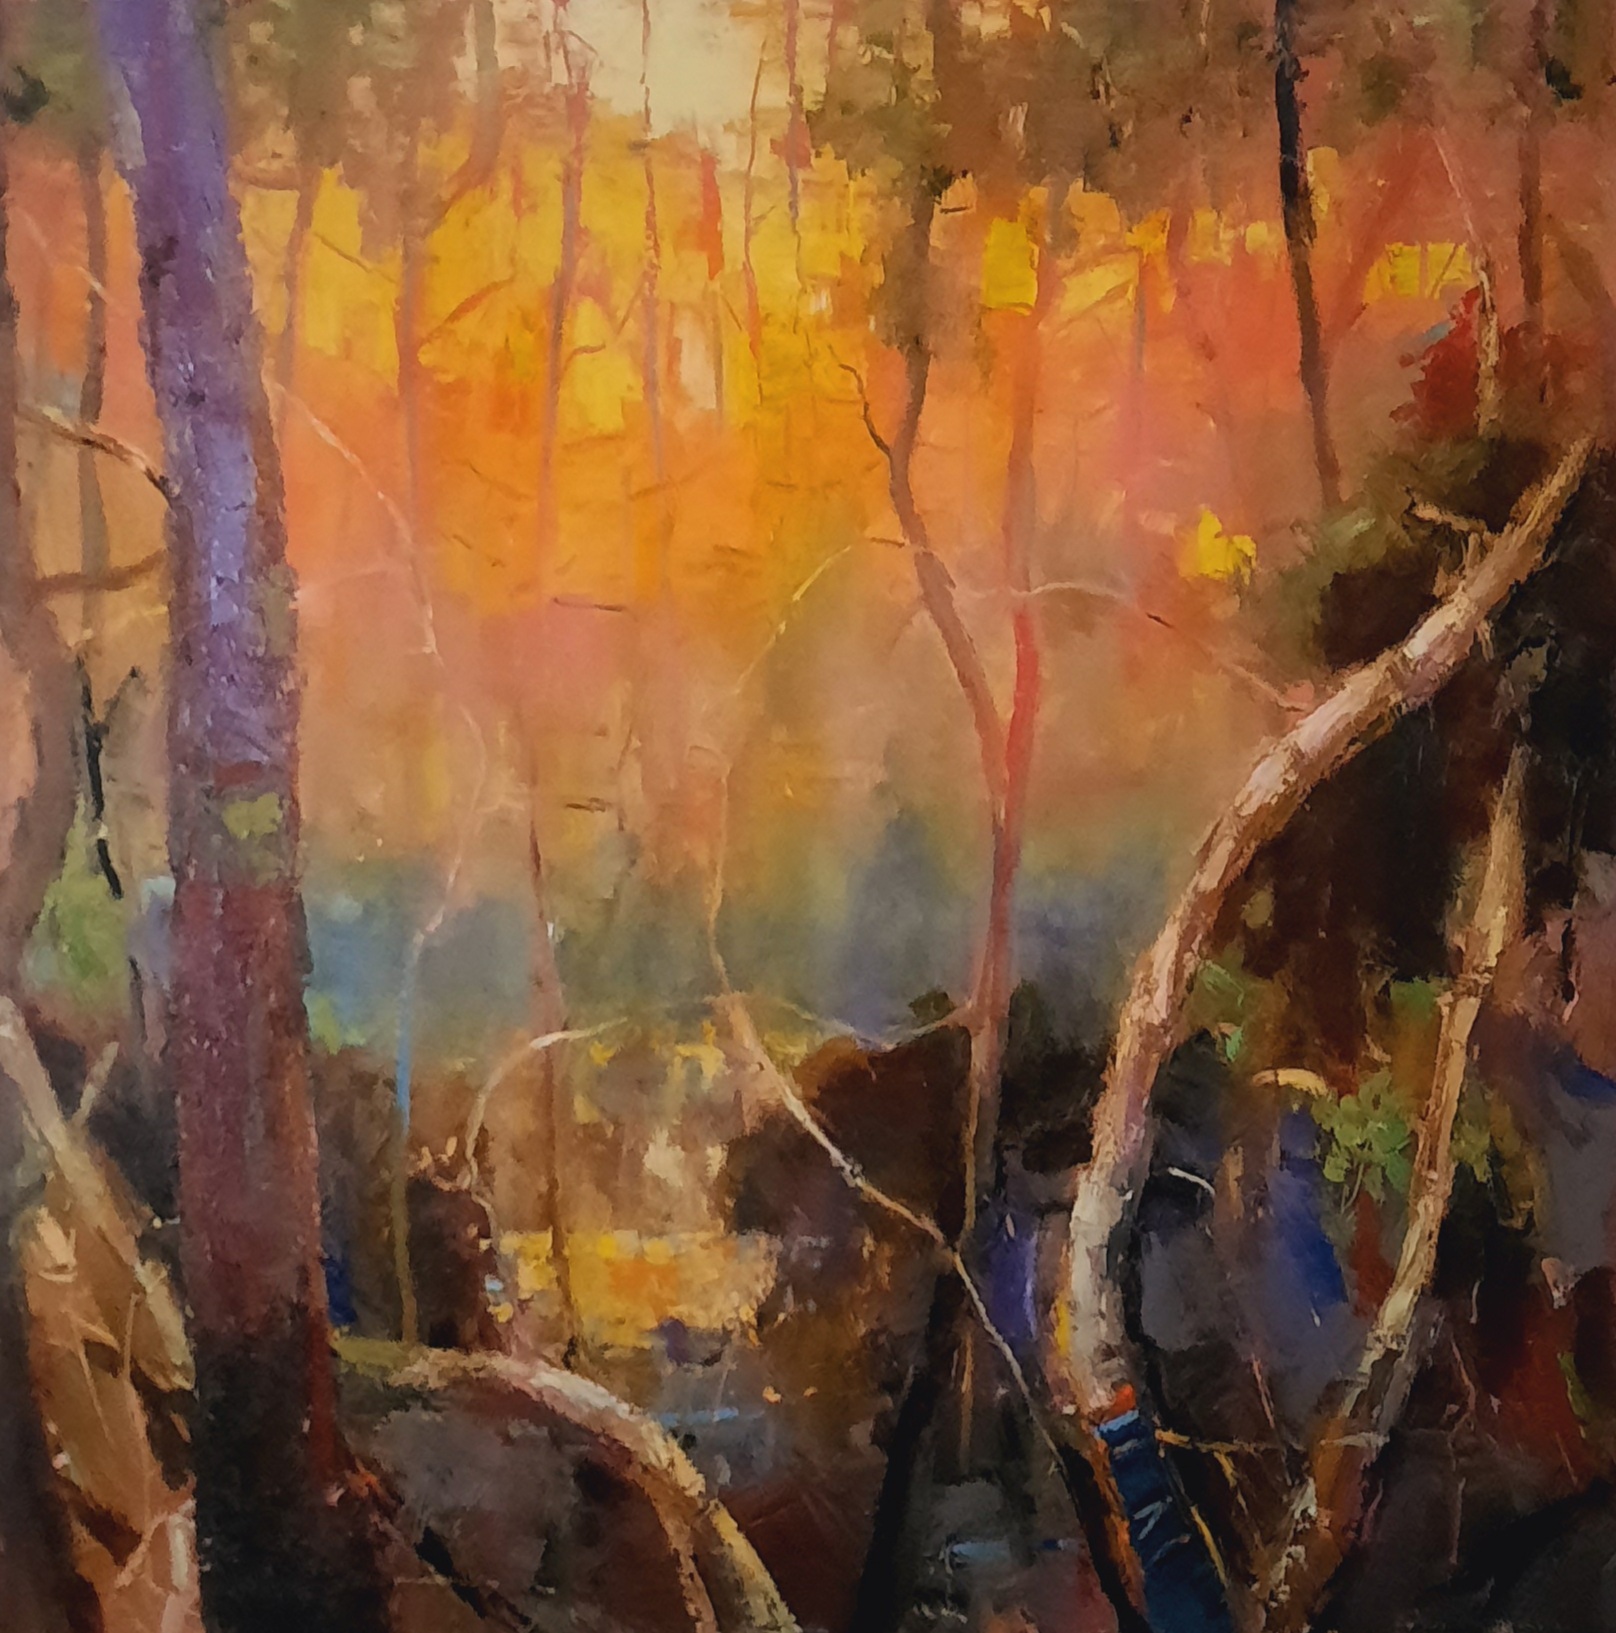 Sunset through the Mangrove Forest by Barry Back | Lethbridge Landscape Prize 2022 Finalists | Lethbridge Gallery